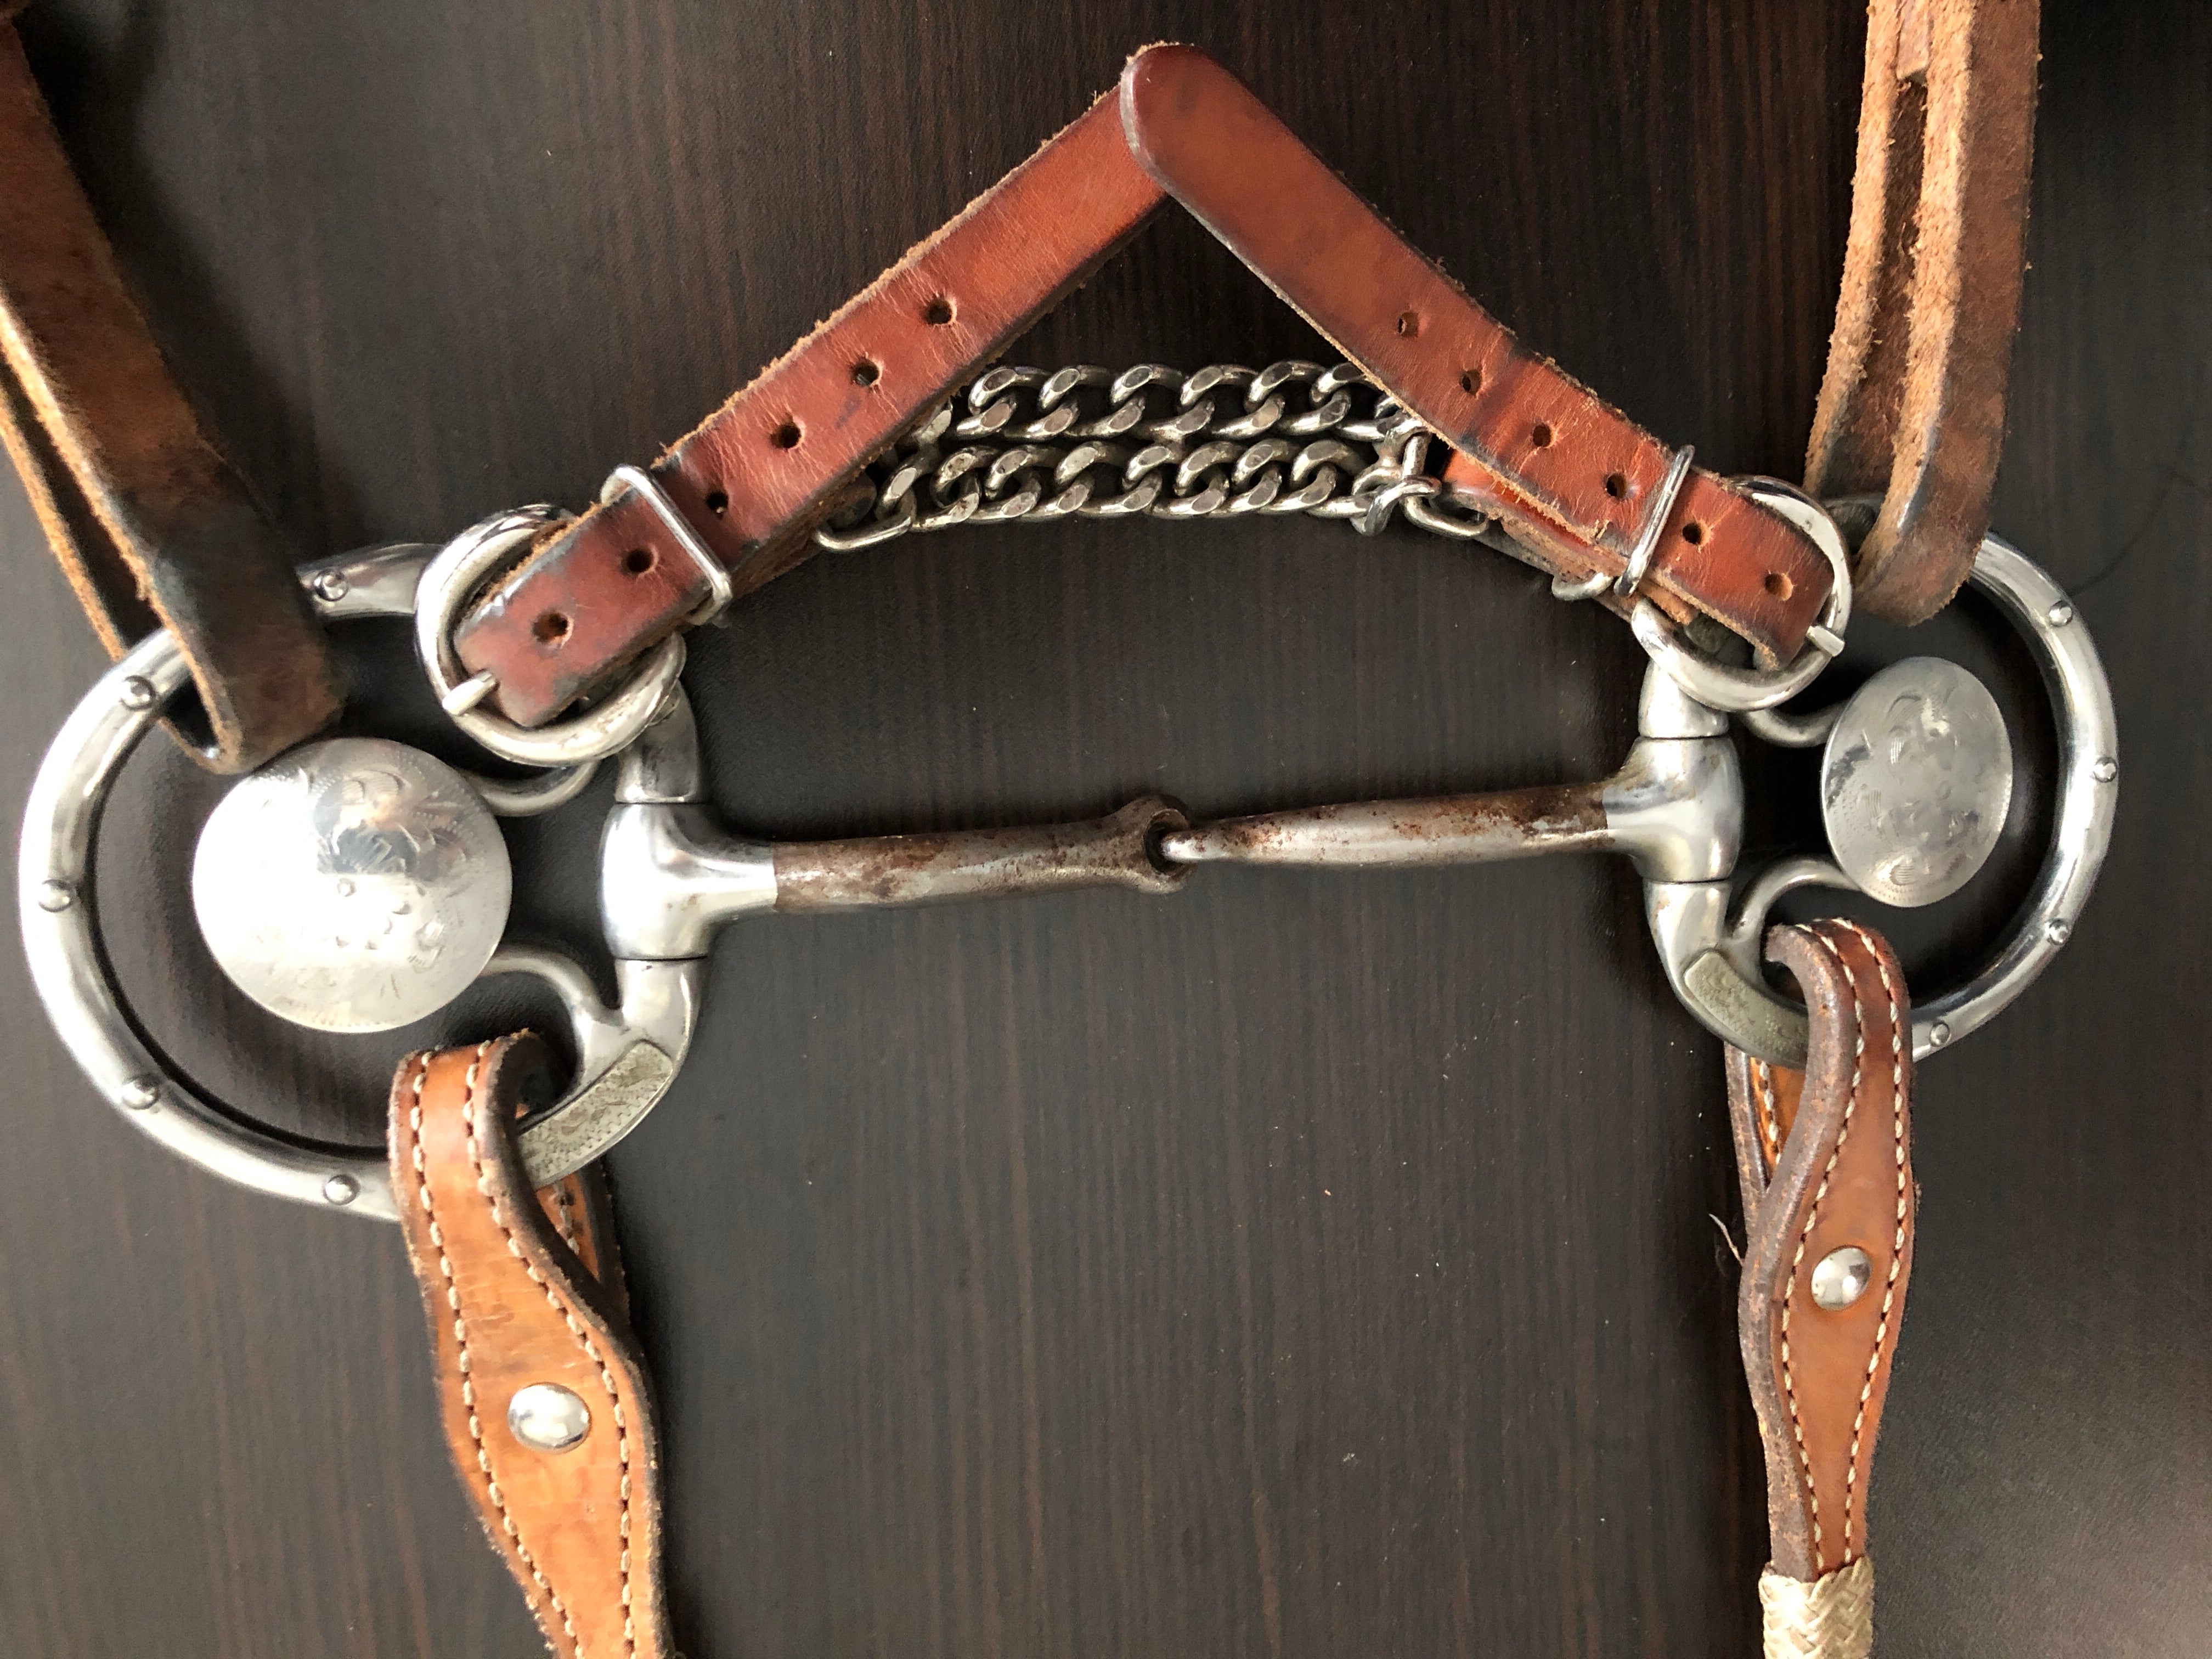 One Ear Bridle with Silver Inlay Snaffle Bit